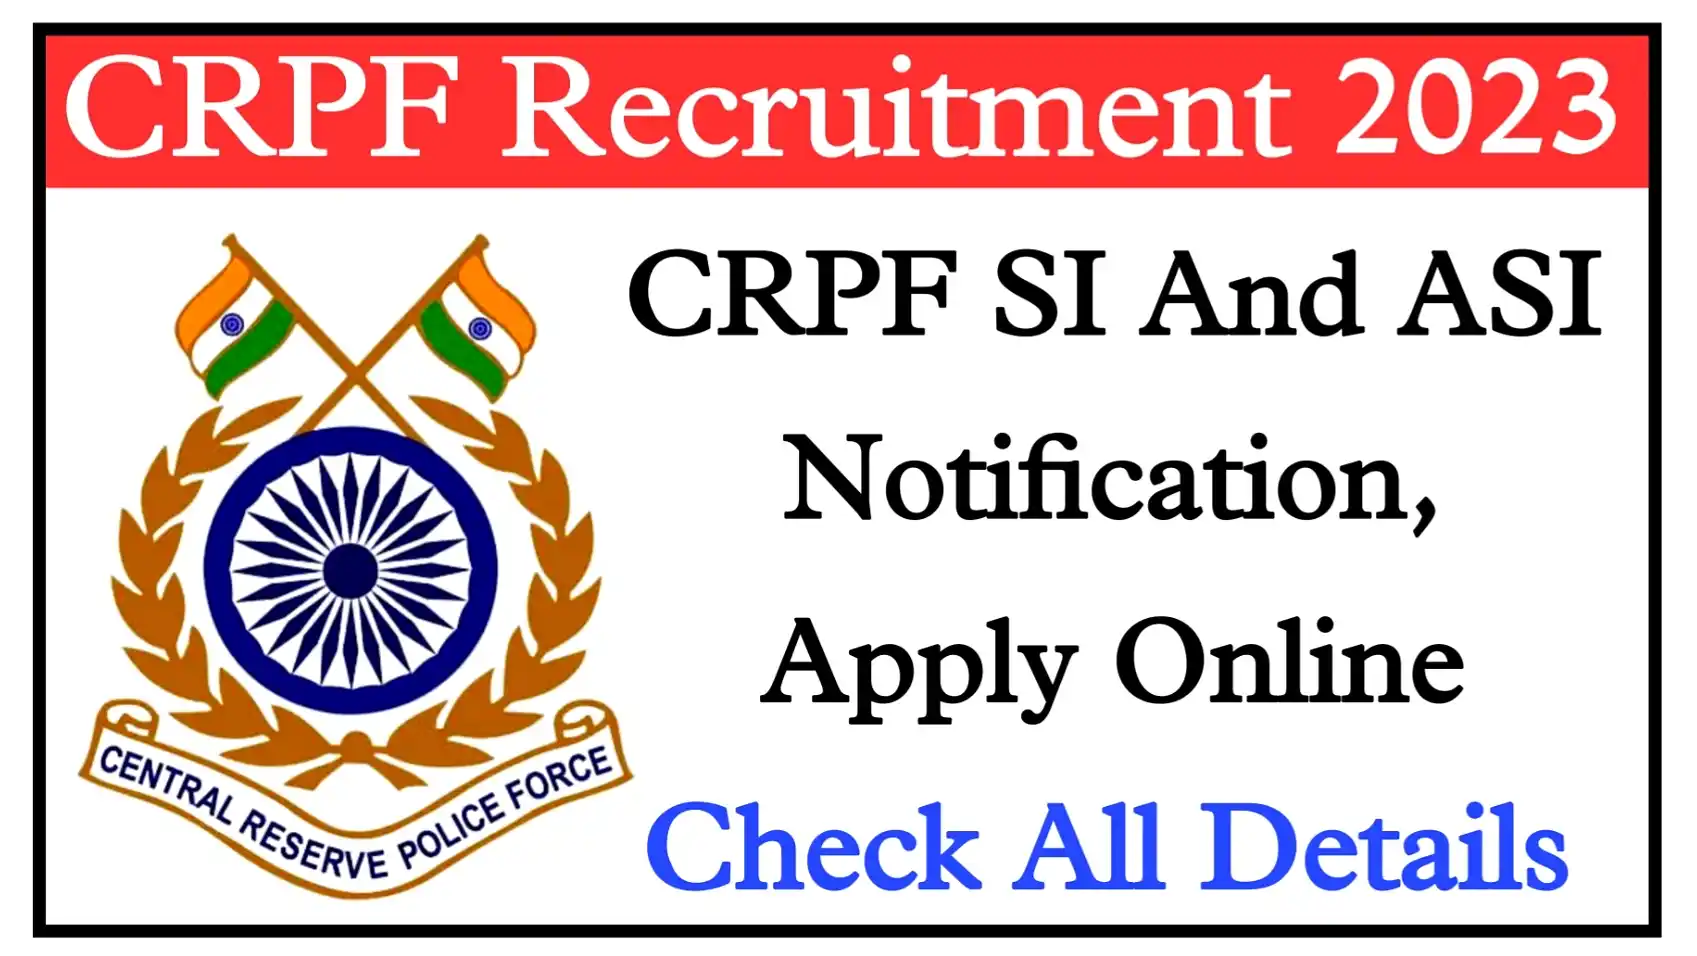 CRPF SI And ASI Recruitment 2023 Notification, Apply Online For 212 Posts Check All Details